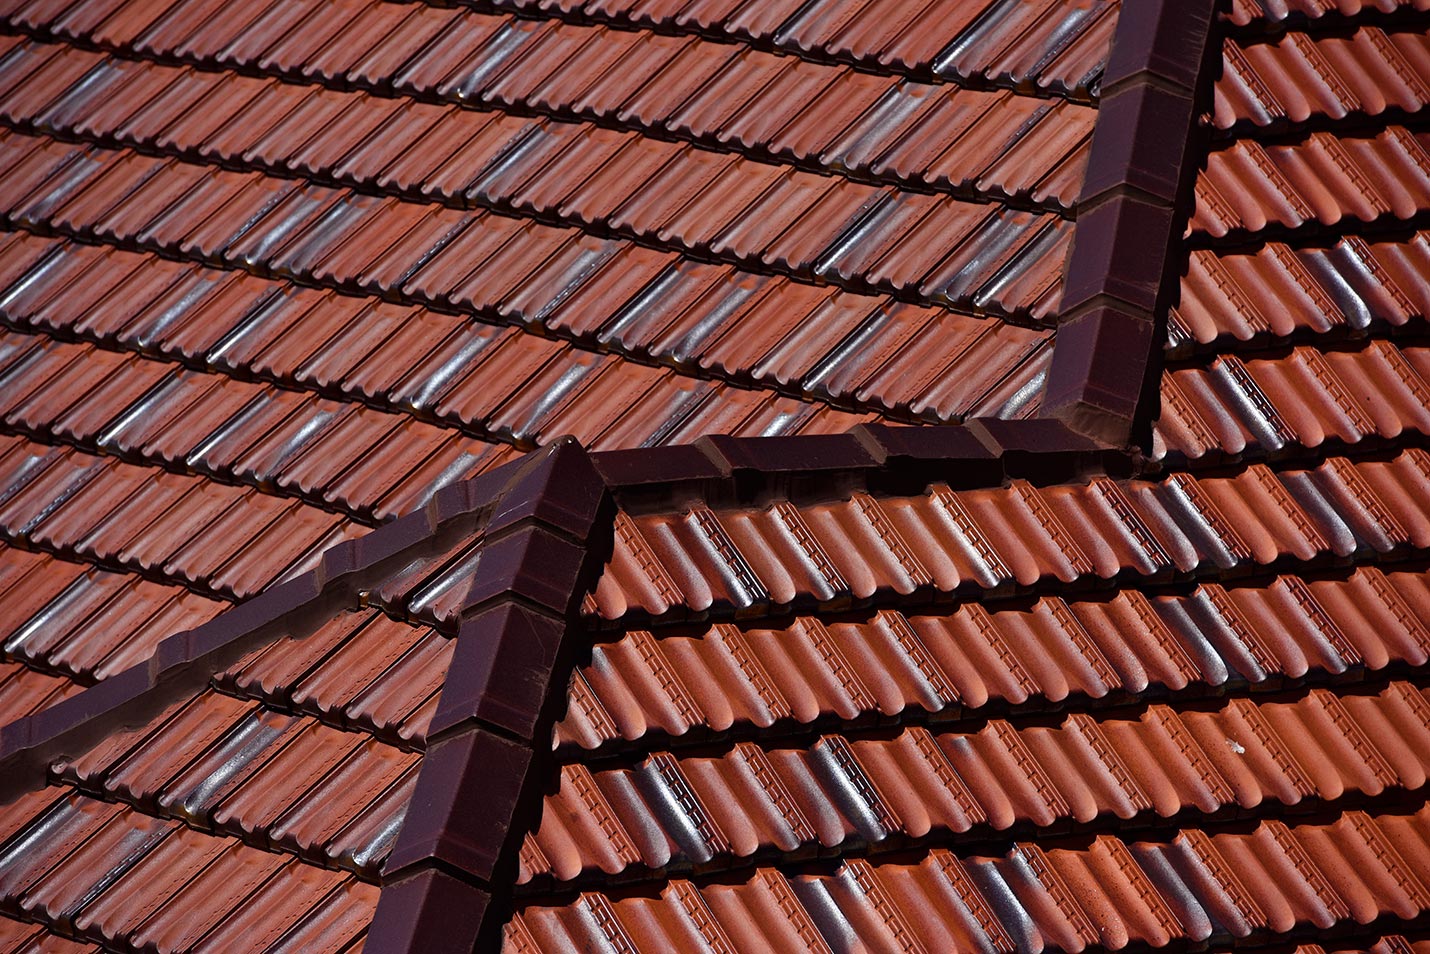 Close up view of the tile re-roof featuring Monier Terracotta tiles - Marseille in Aurora Gold.